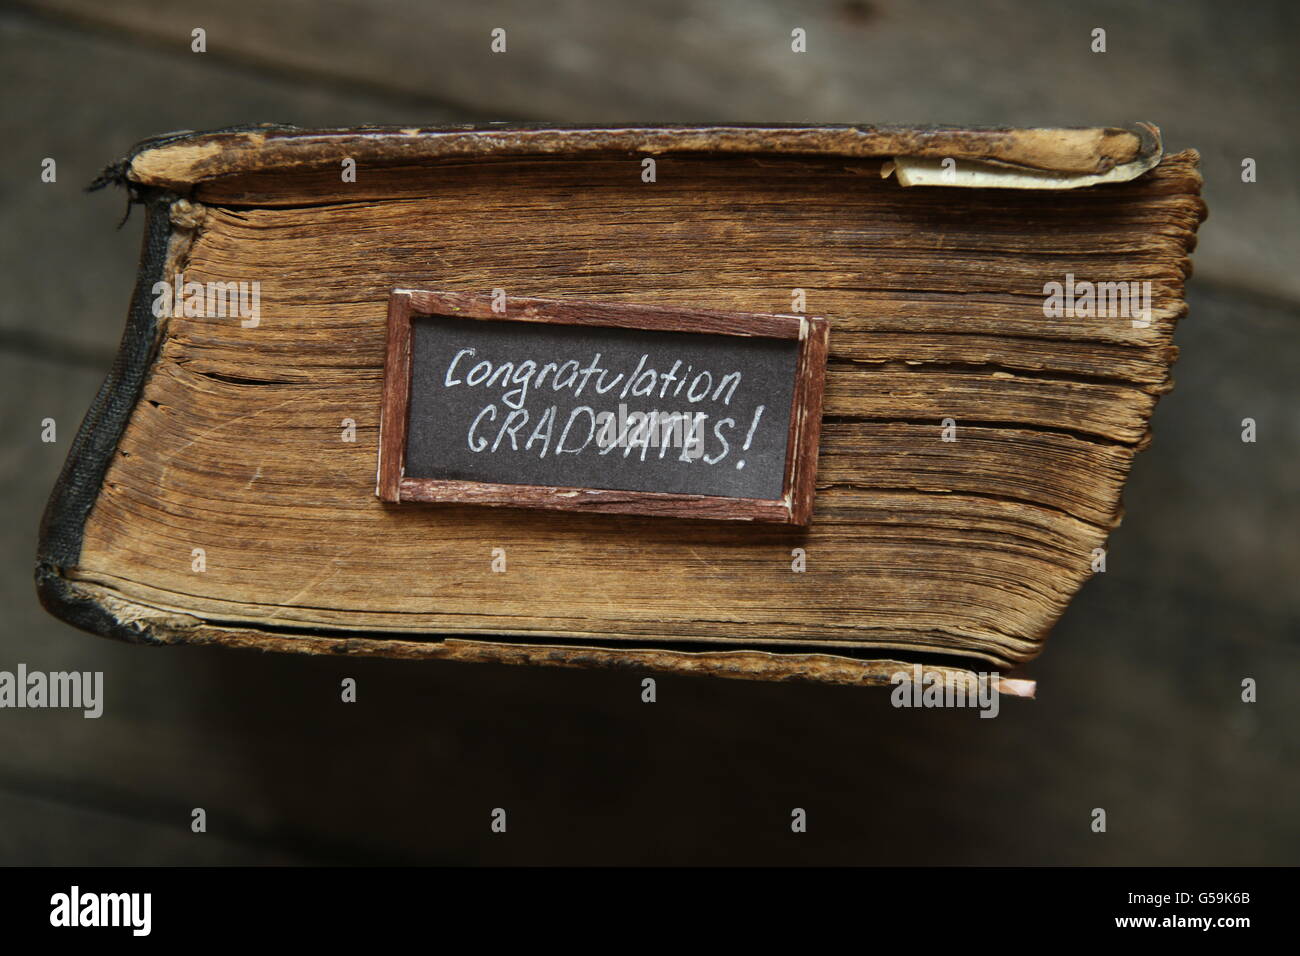 congratulations graduates text and vintage book on table Stock Photo